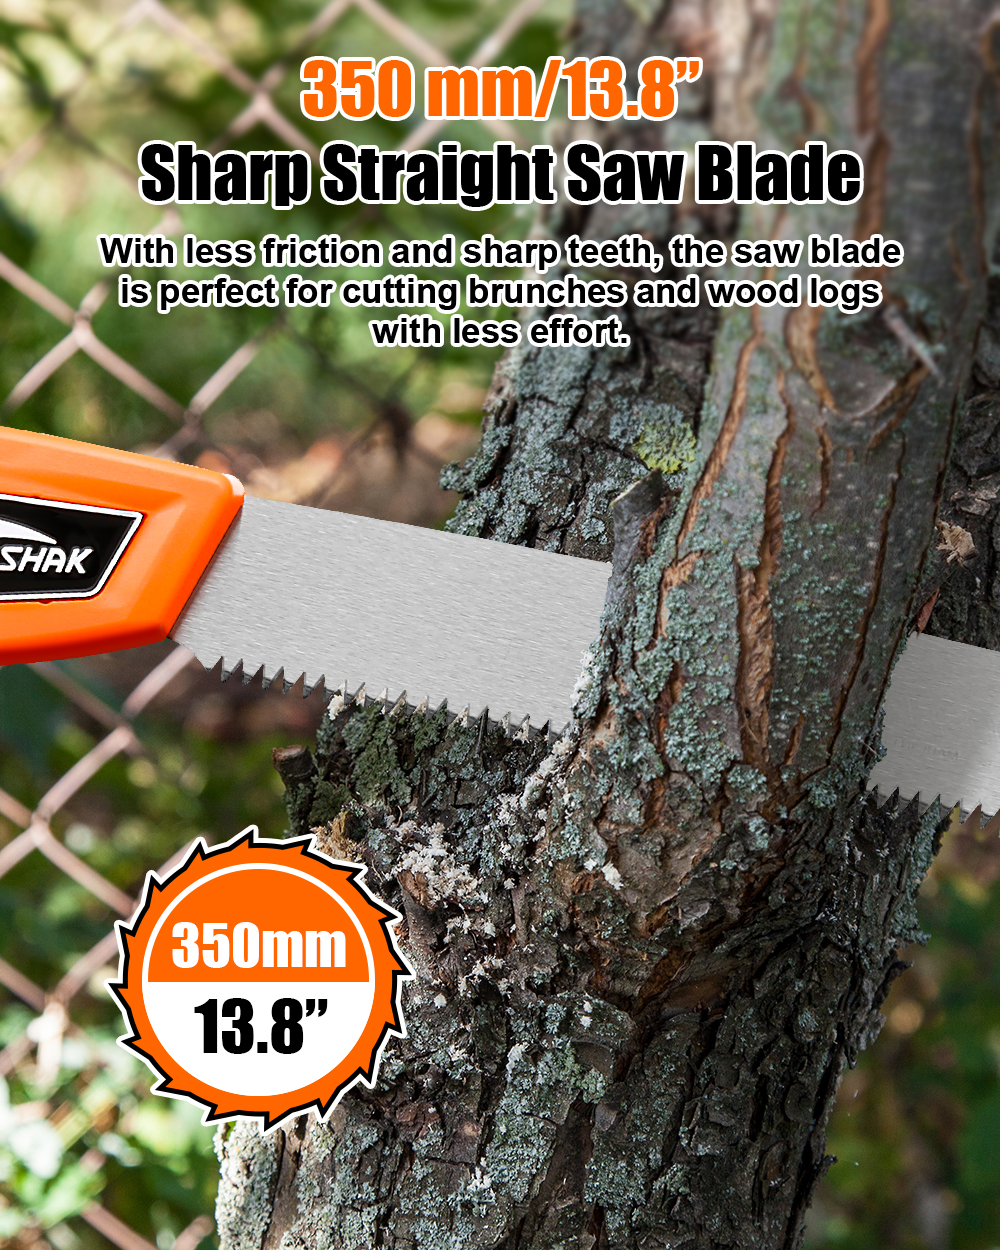 TOPSHAK-TS-DS5-350mm-Straight-Saw-Use-for-Gardening-Camping-Tree-Trimming-Cutting-Wood-Branches-1935639-2